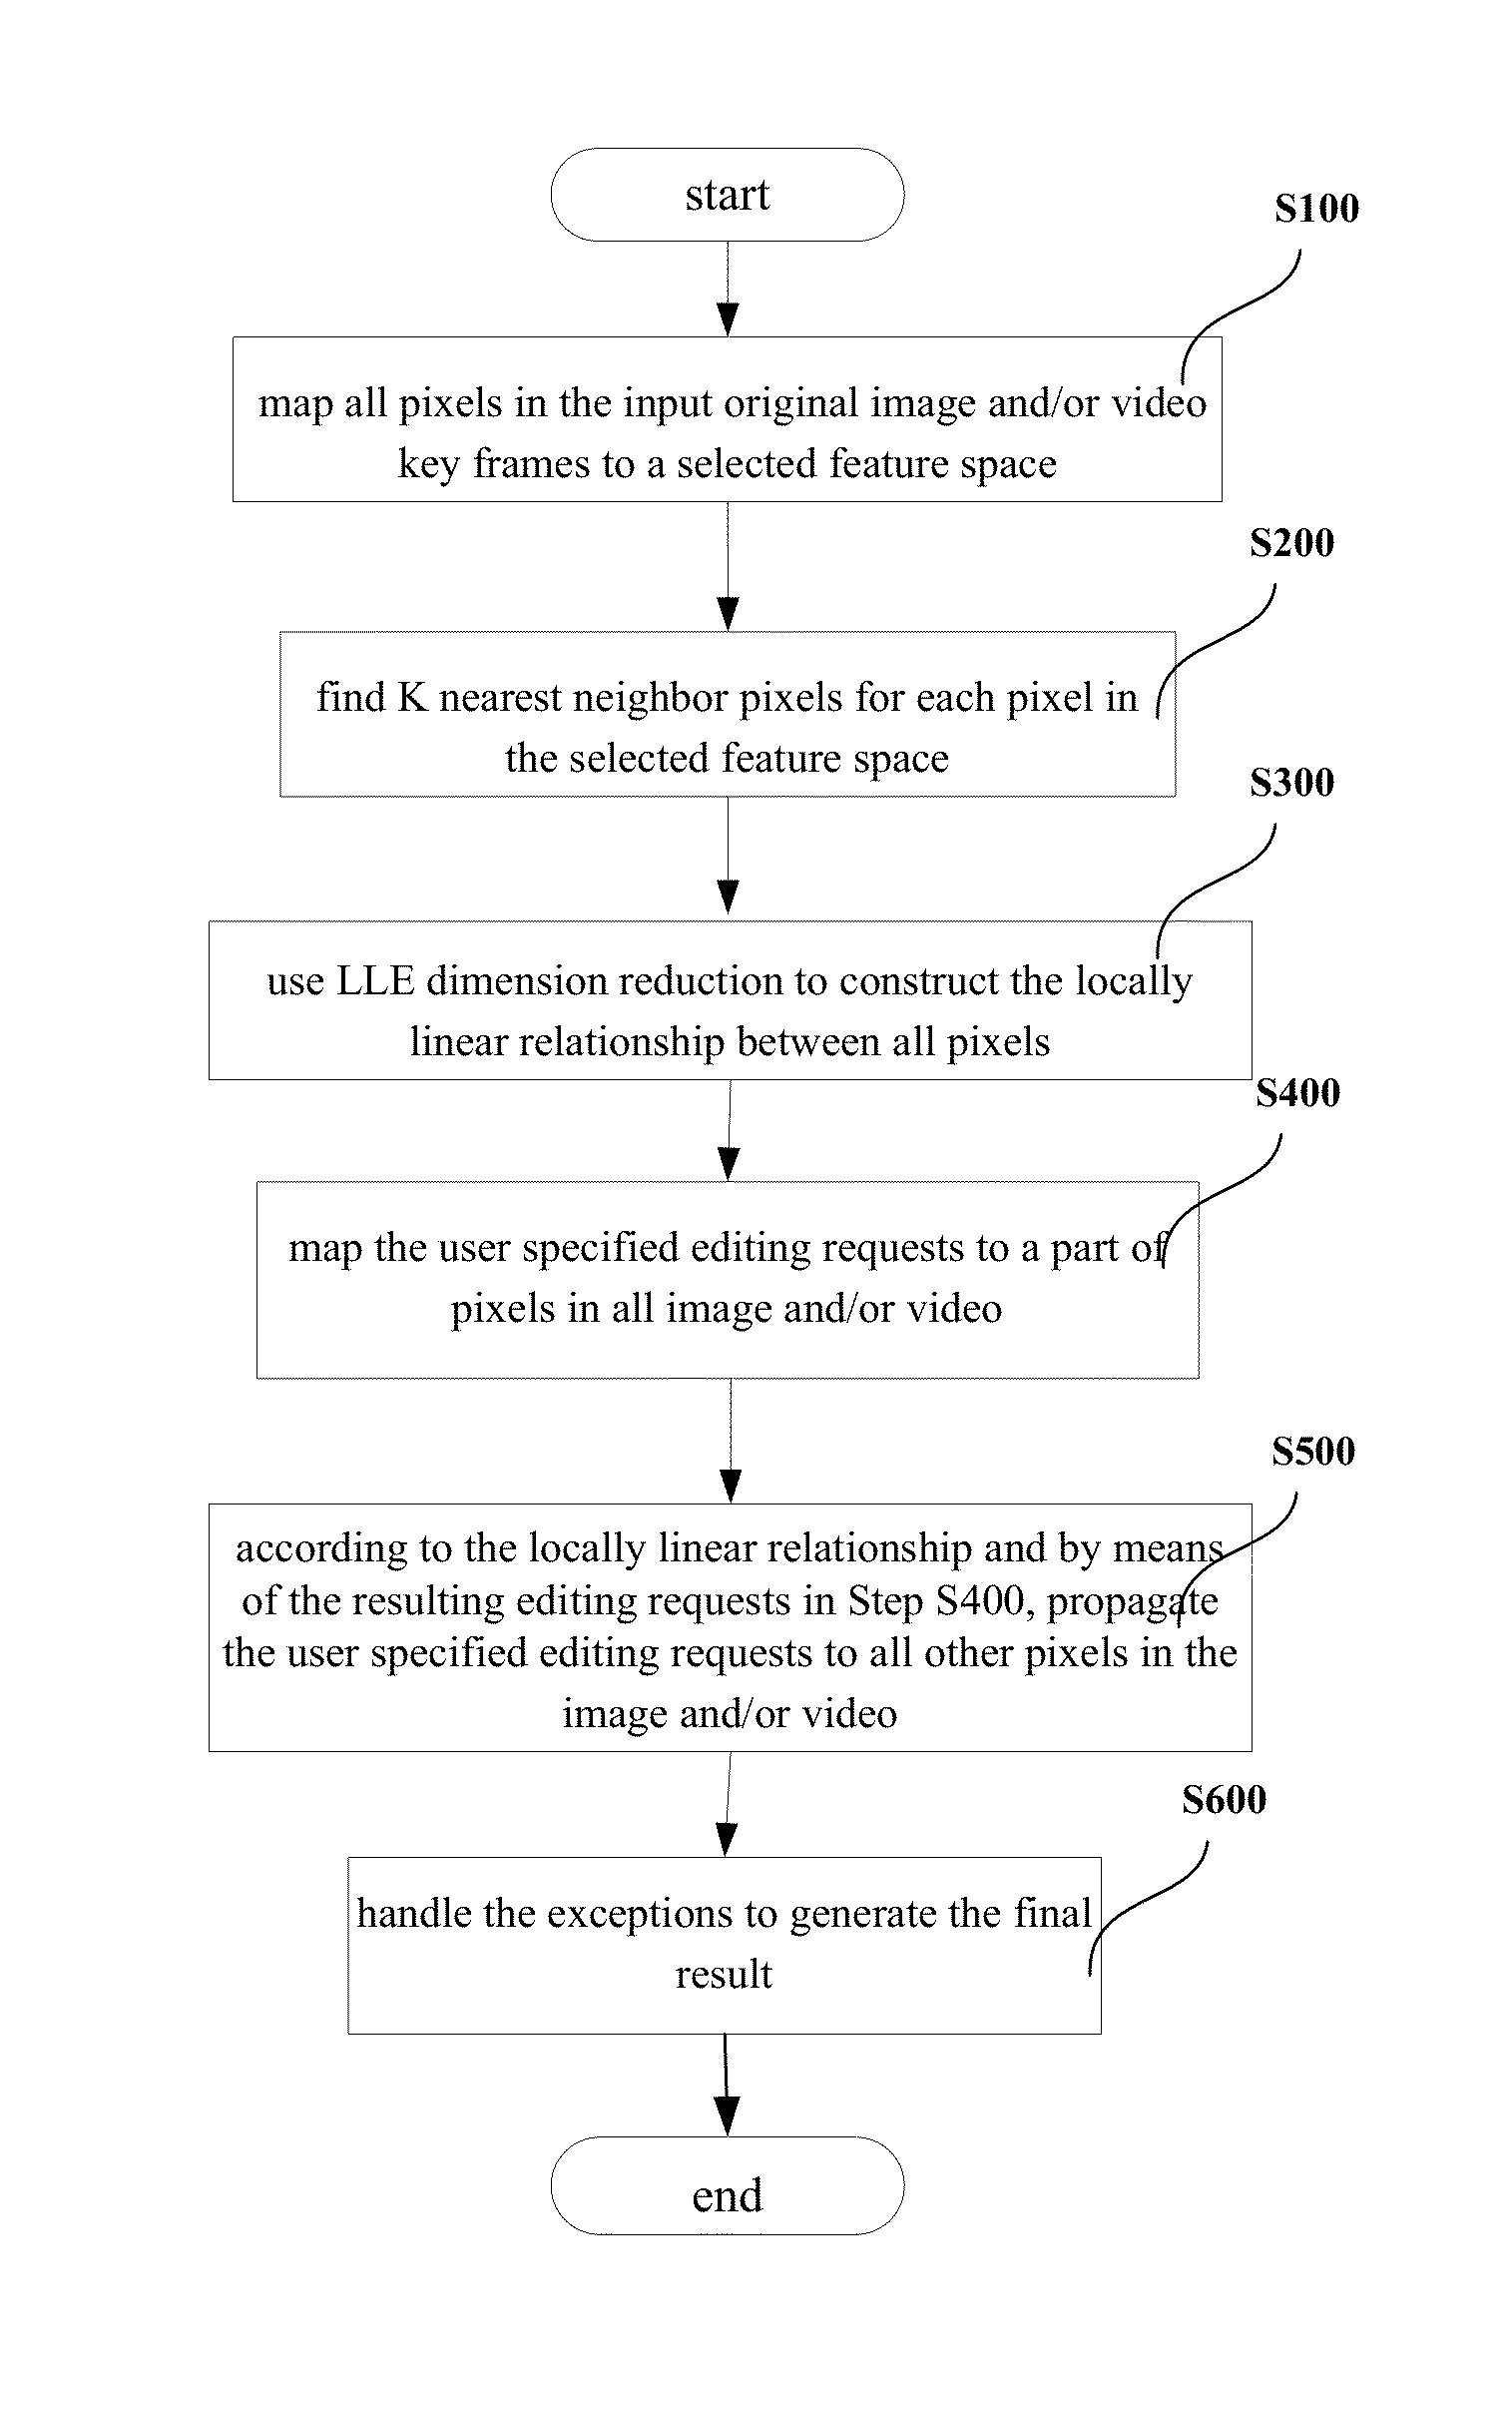 Method for Editing Propagation of Video and Image Content Based on Local Feature Structure Preservation